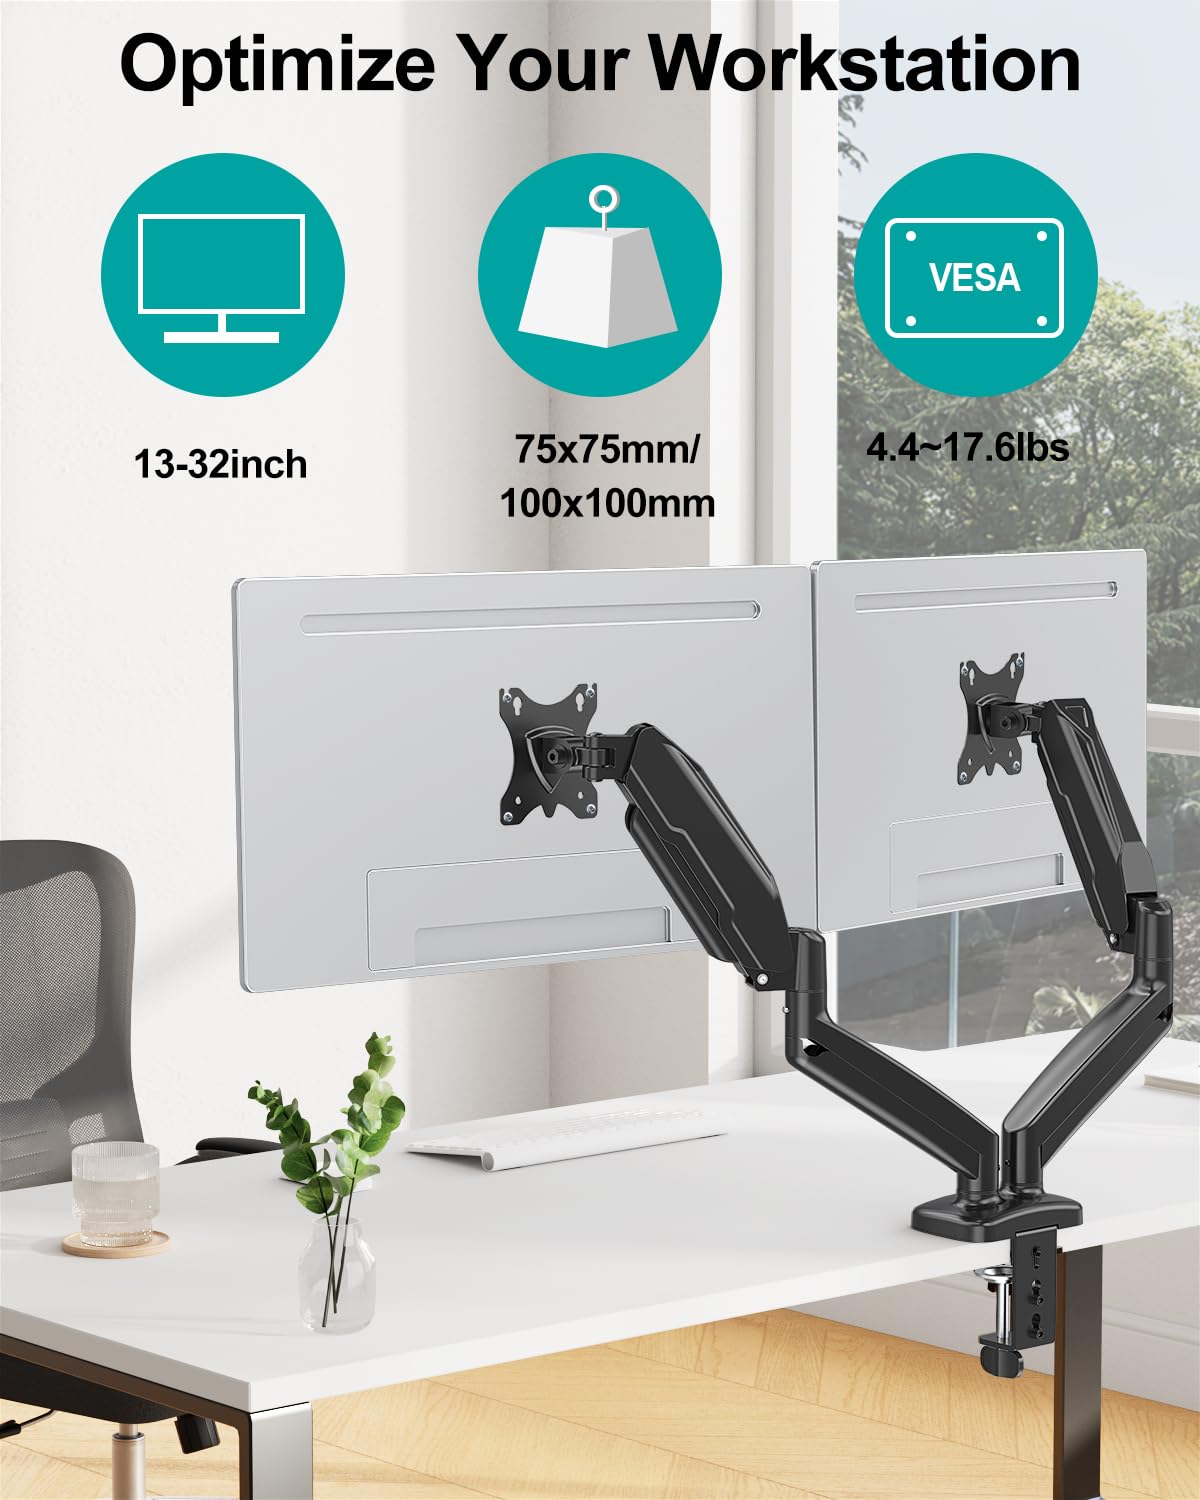 MOUNT PRO Dual Monitor Mount Fits 13 to 32 Inch Computer Screen, Height Adjustable Monitor Stand for 2 Monitors, Gas Spring Monitor Arm Holds up to 17. 6lbs Each, Monitor Desk VESA Mount, Black